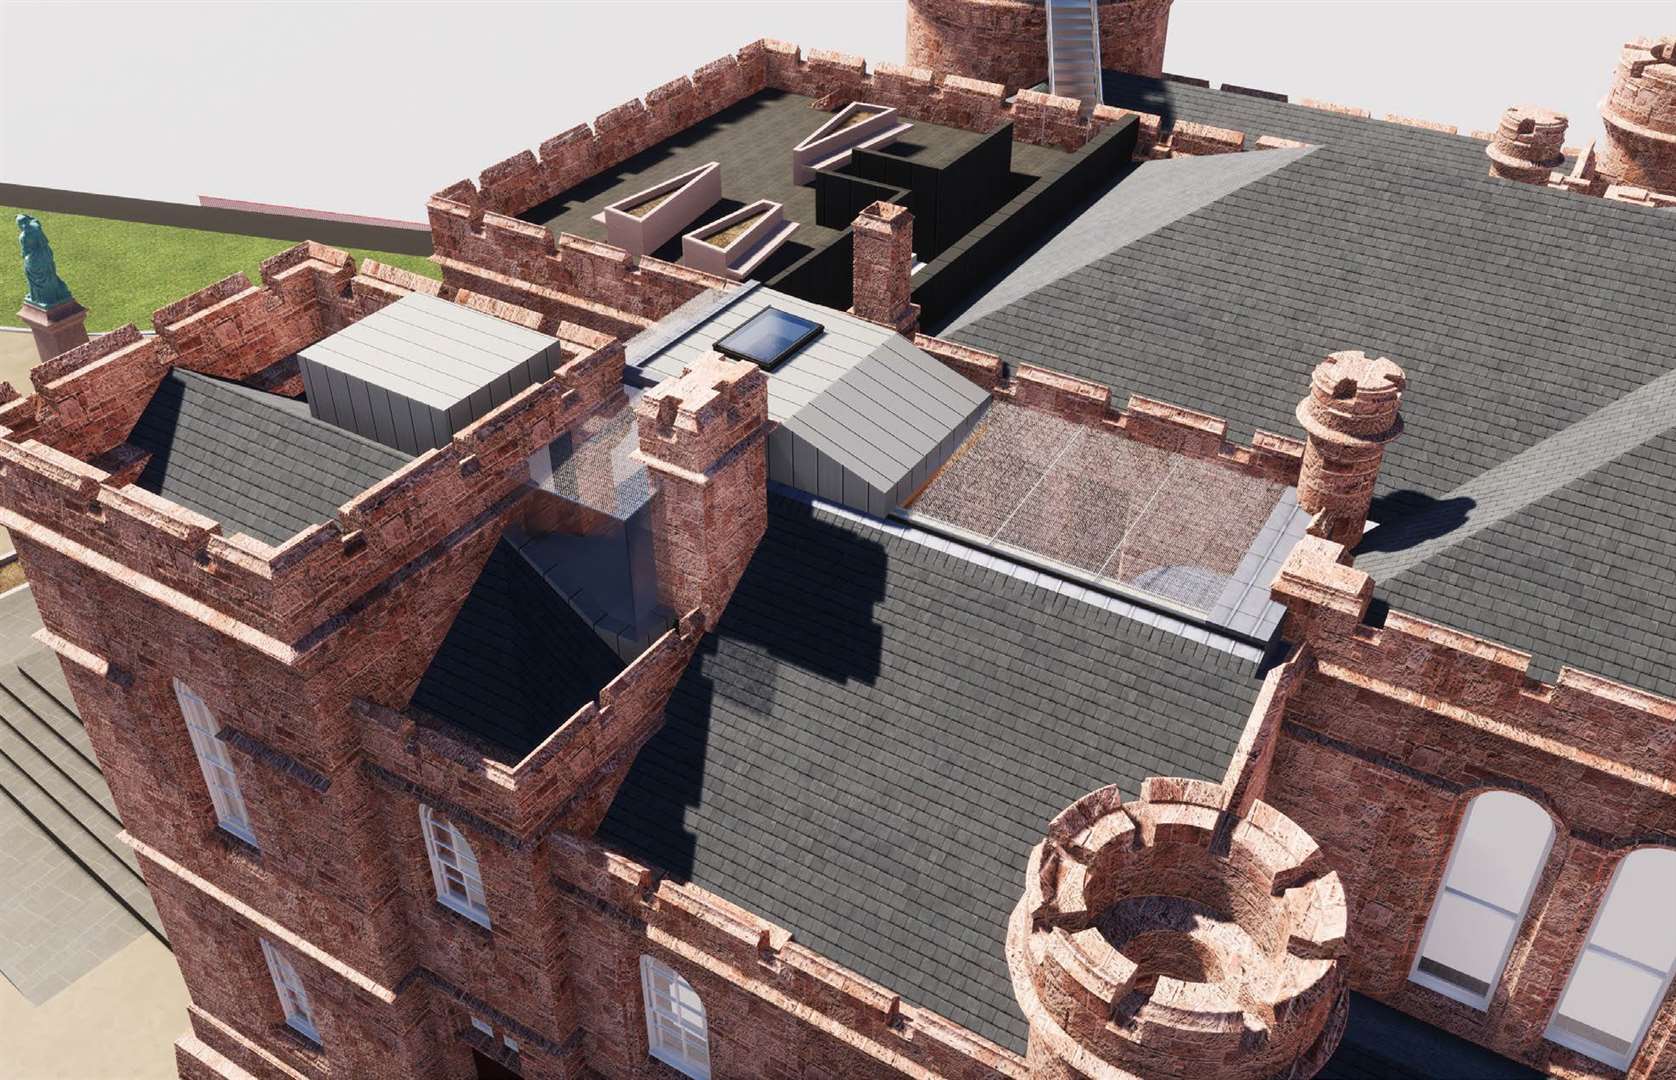 A bird's eye view of the proposed roof terrace at Inverness Castle.